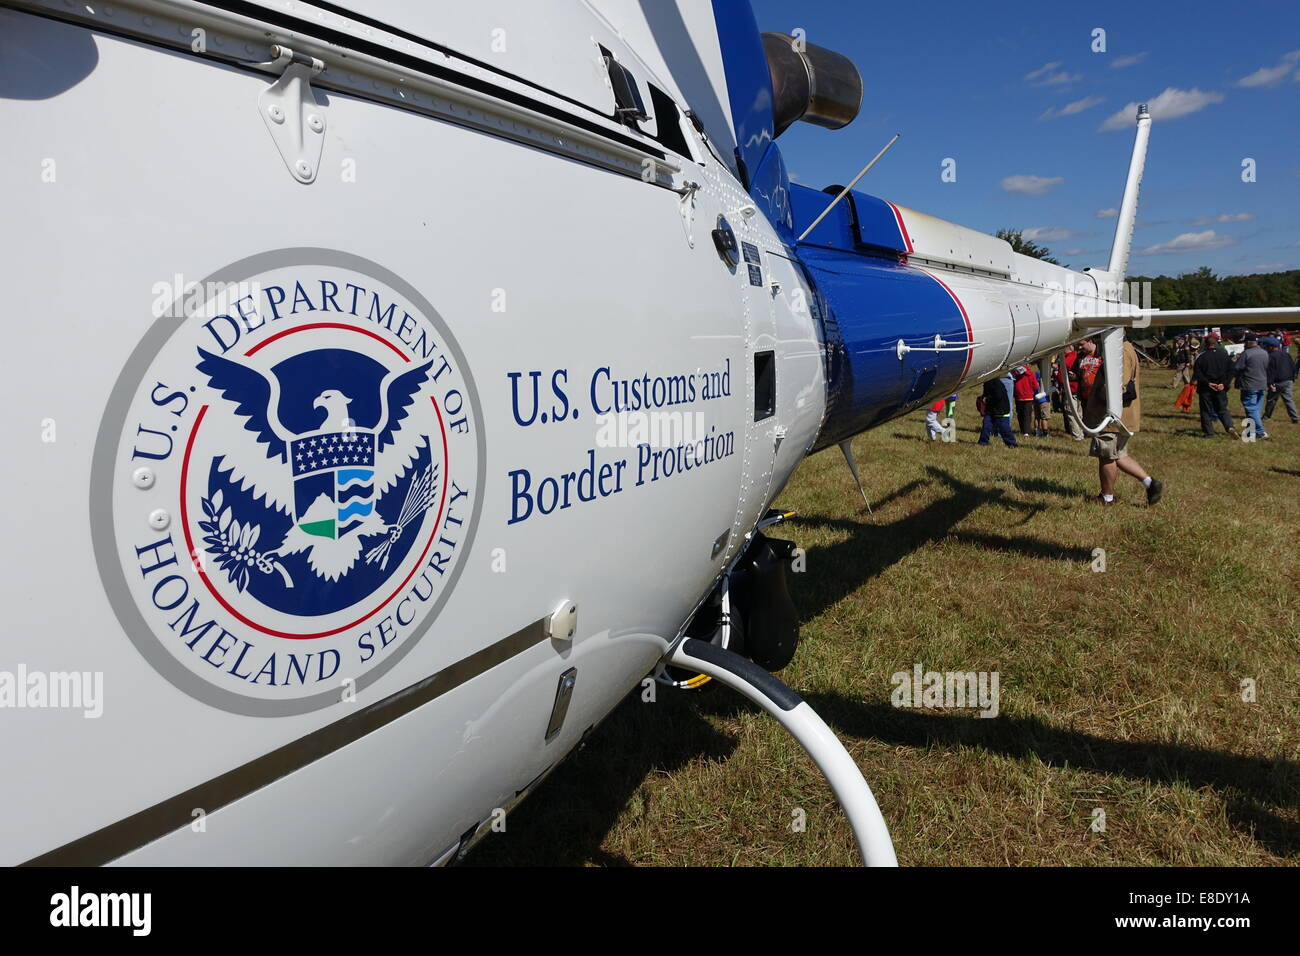 helicopter-operated-by-the-u-s-department-of-homeland-security-united-E8DY1A.jpg